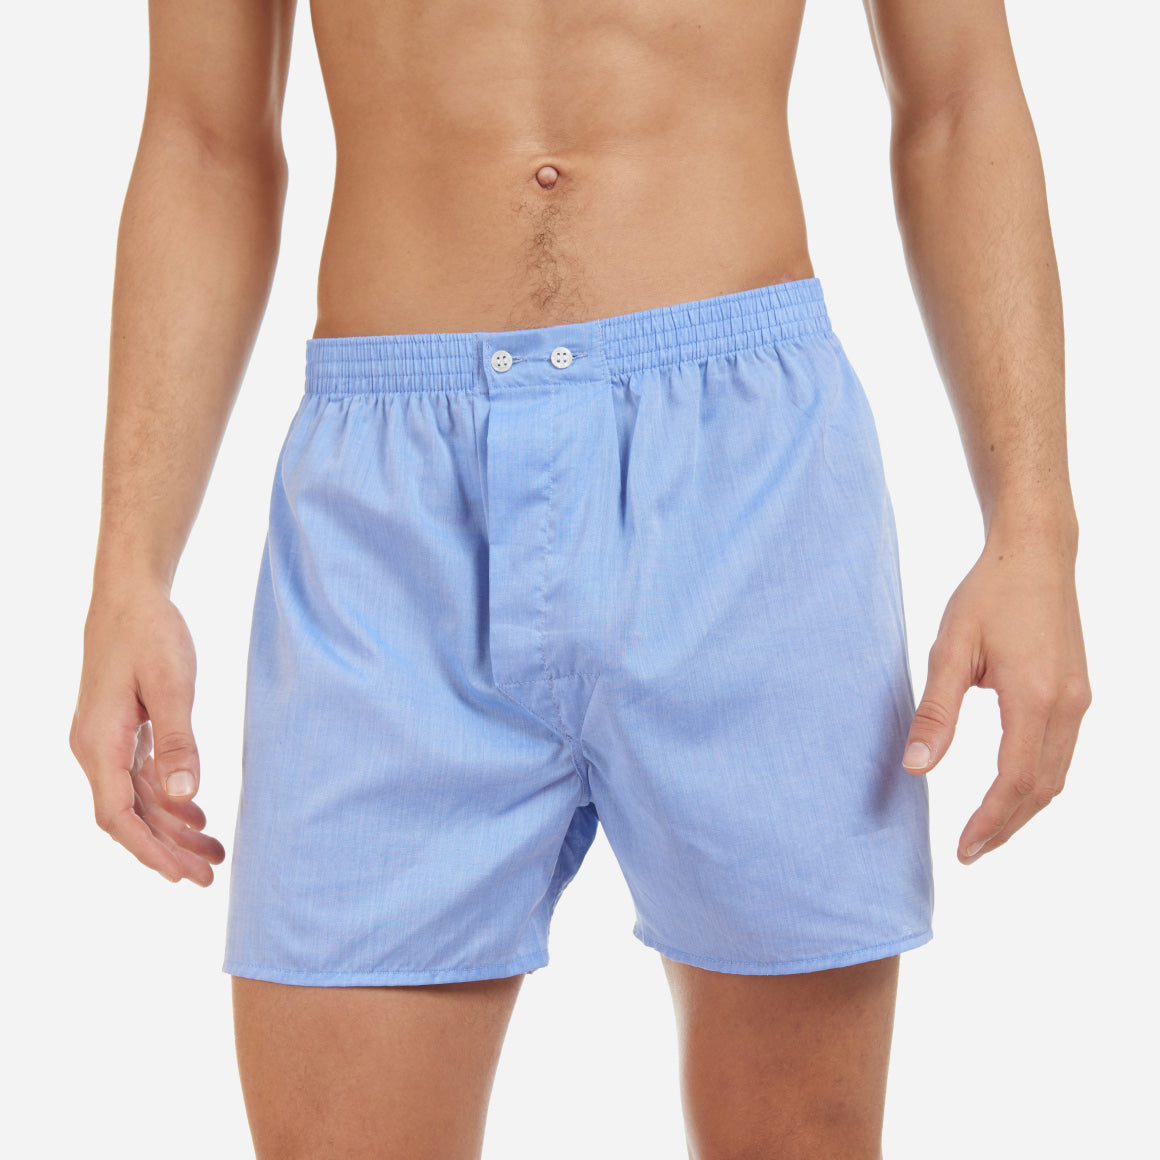 A front-facing model is wearing a classic fit boxer in. blue made 100% cotton. Model is shirtless.